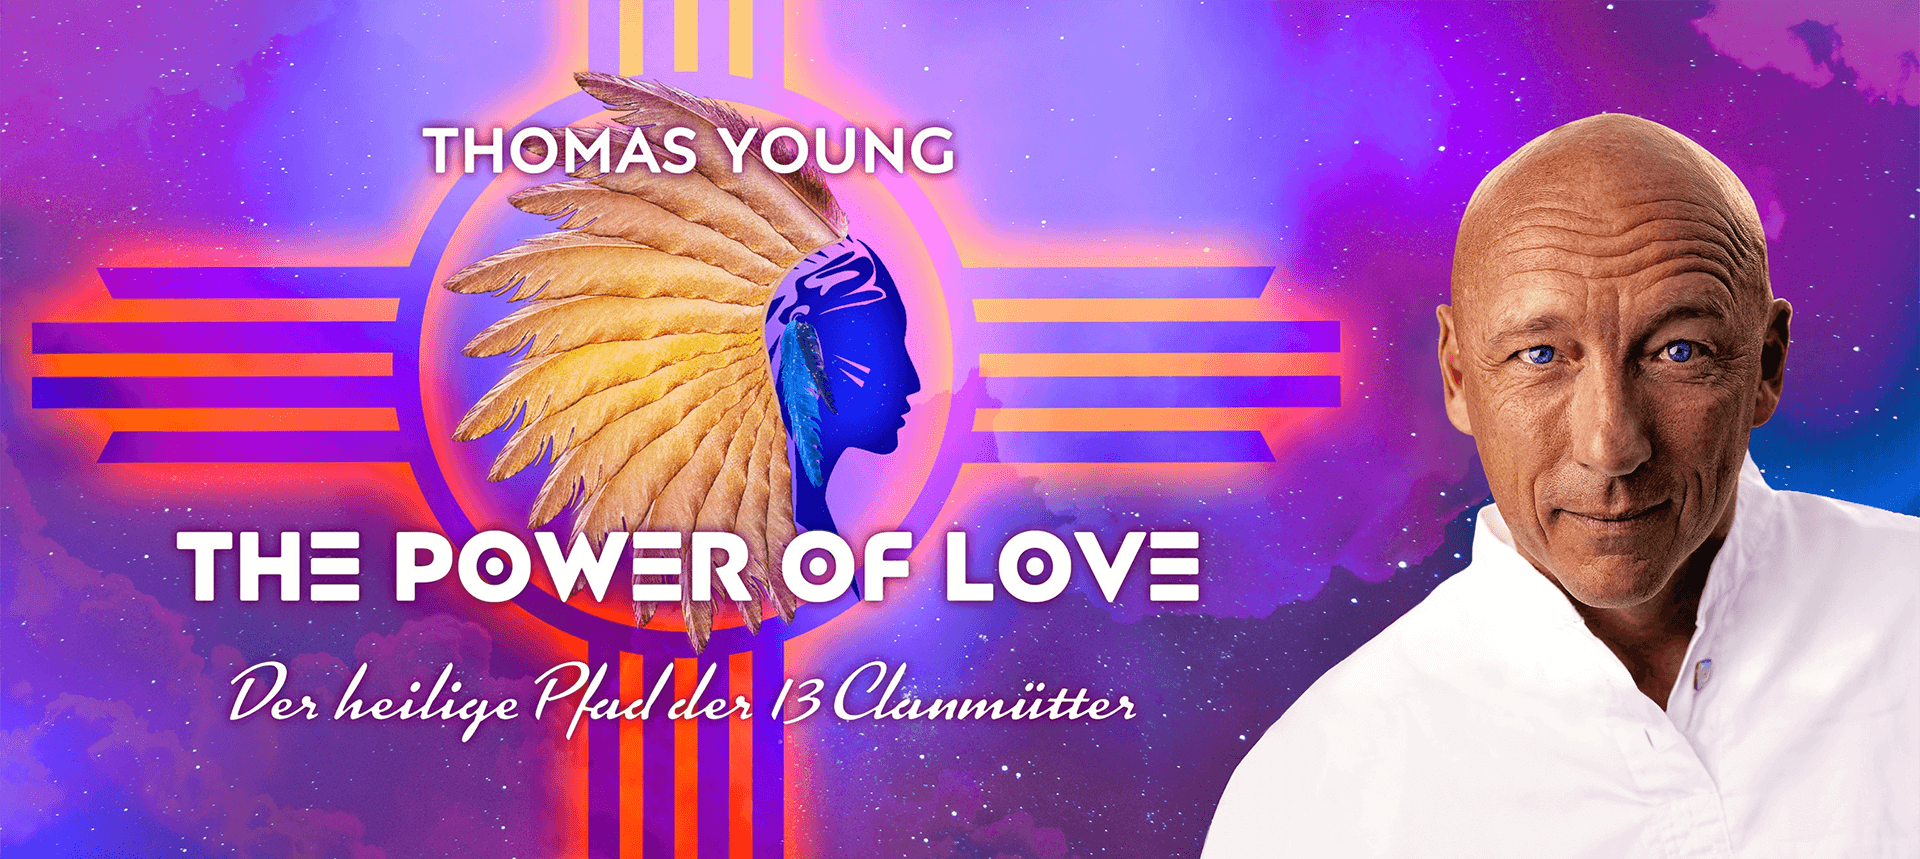 THE POWER OF LOVE - Thomas Young - Die neue Masterclass 2023 1